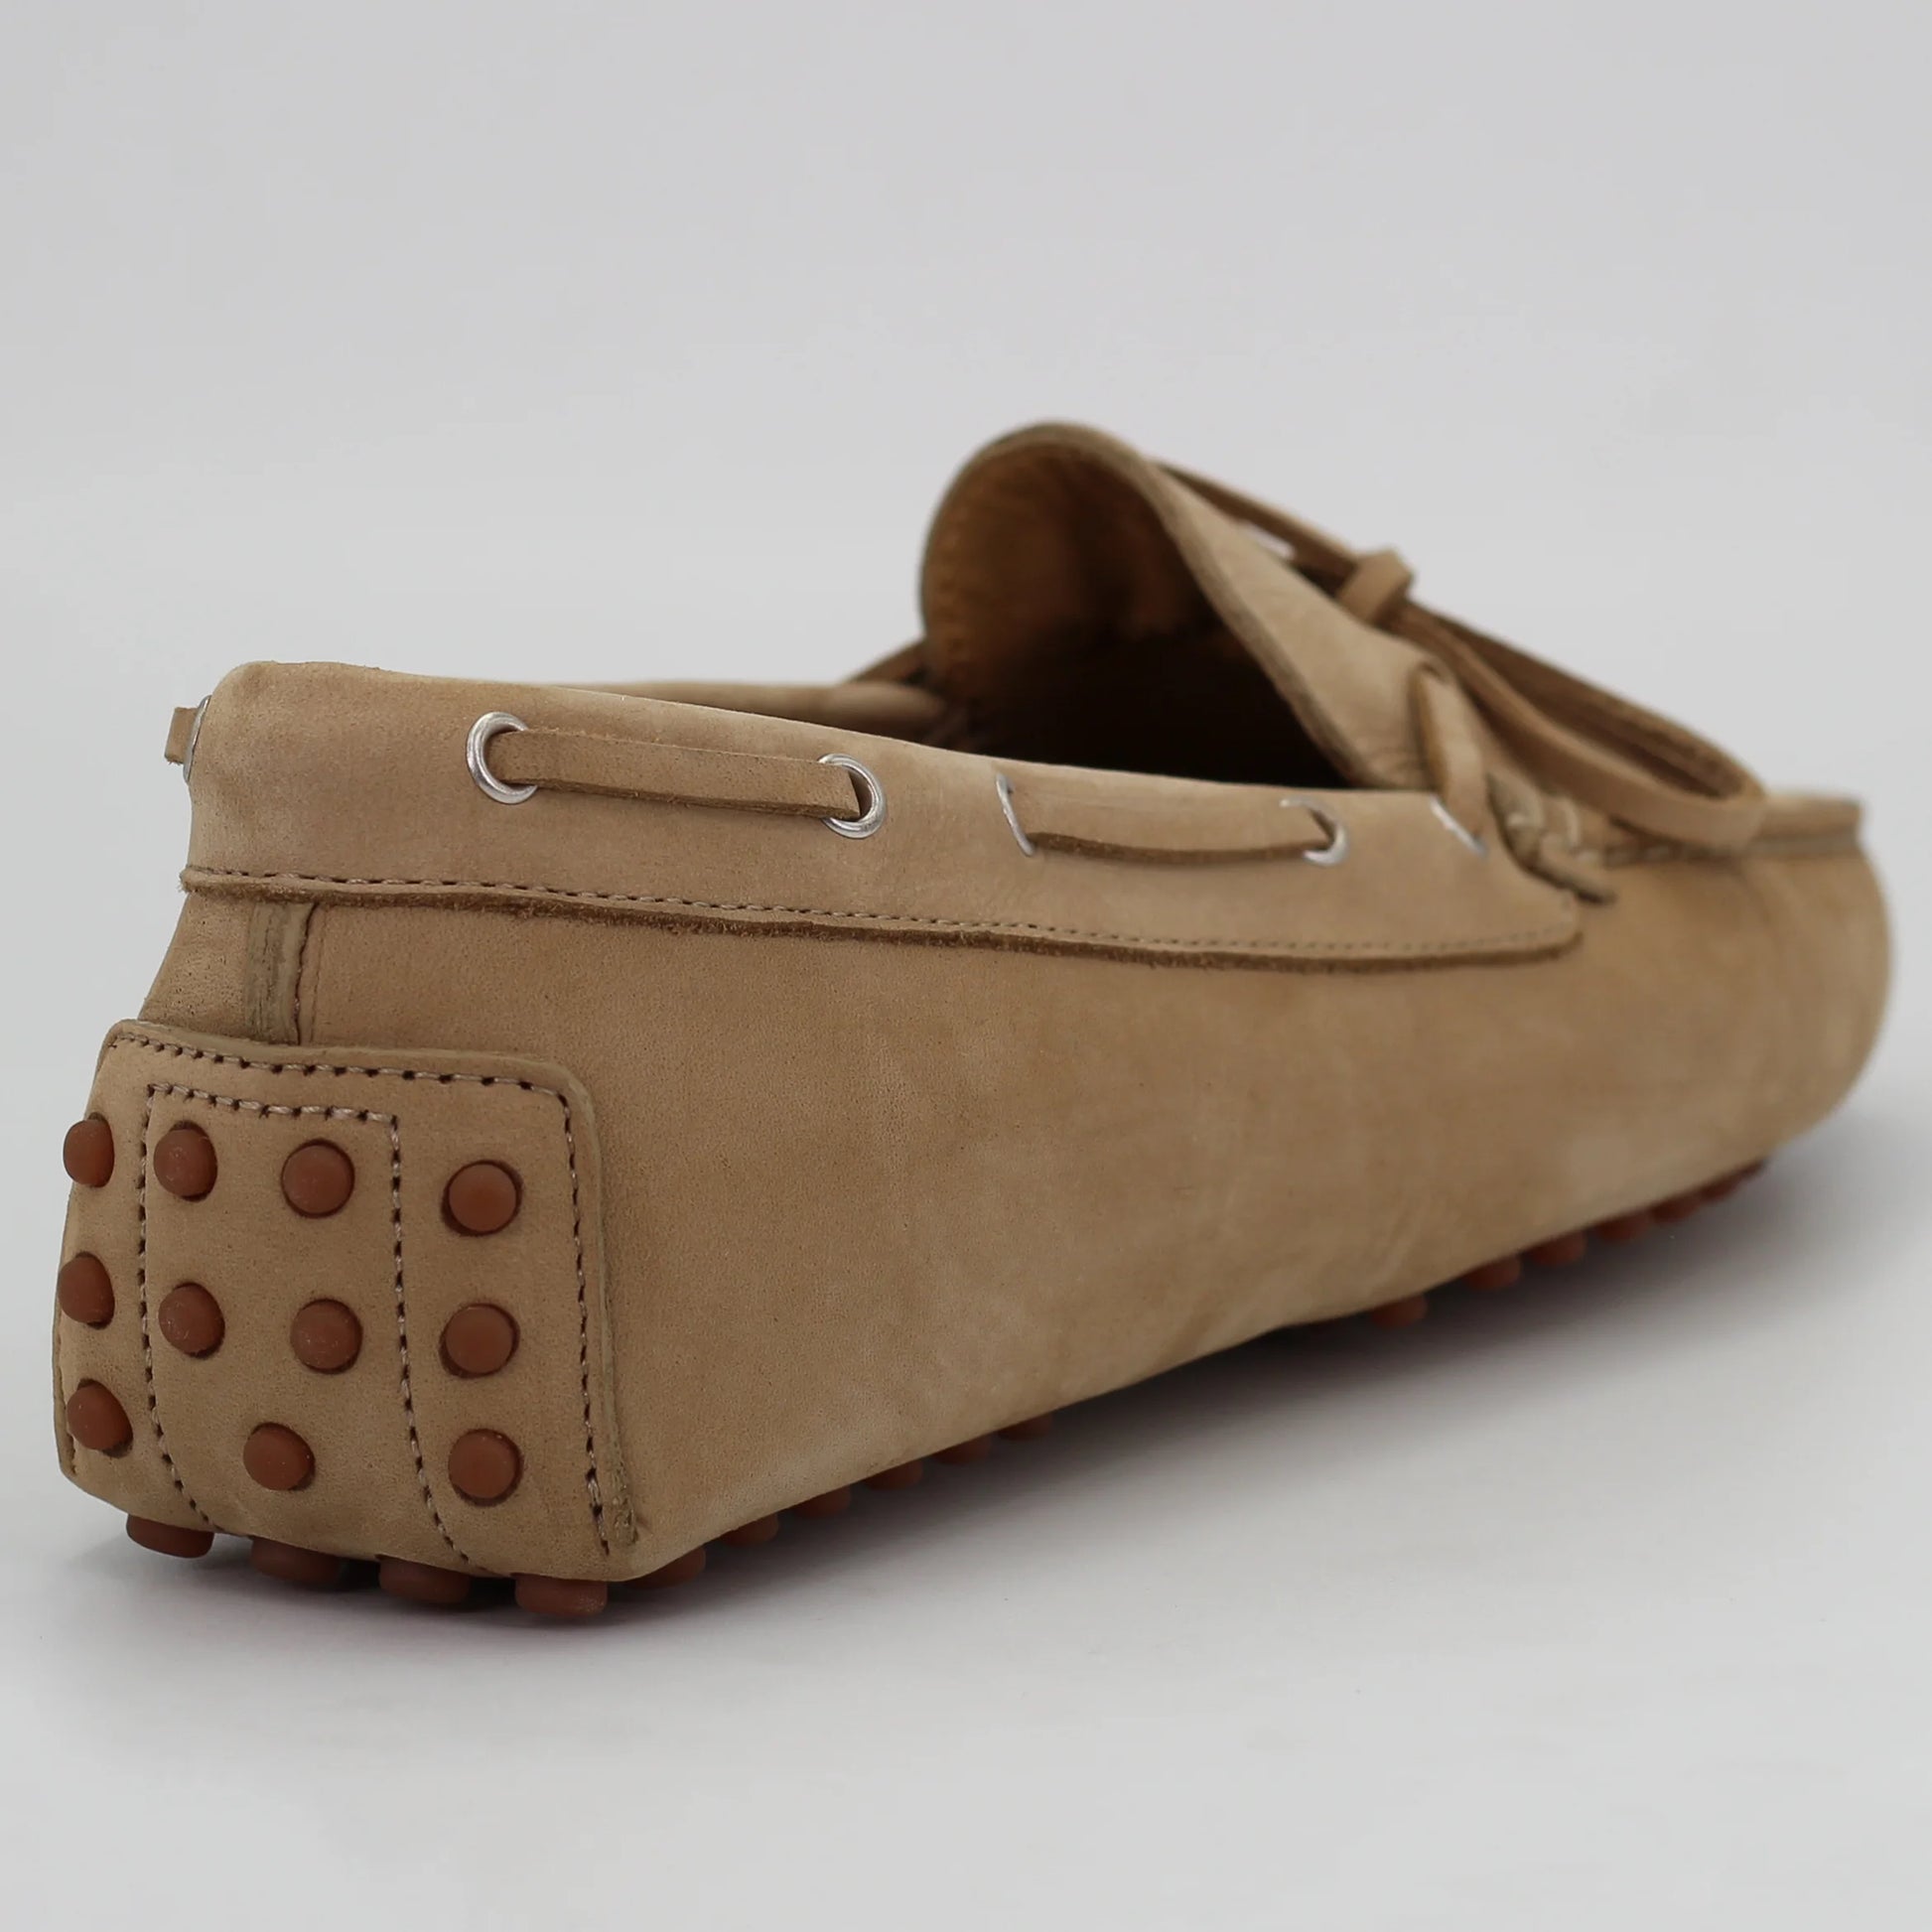 Shop Handmade Italian Leather suede moccasin in tan (COND04011) or browse our range of hand-made Italian shoes in leather or suede in-store at Aliverti Cape Town, or shop online. We deliver in South Africa & offer multiple payment plans as well as accept multiple safe & secure payment methods.